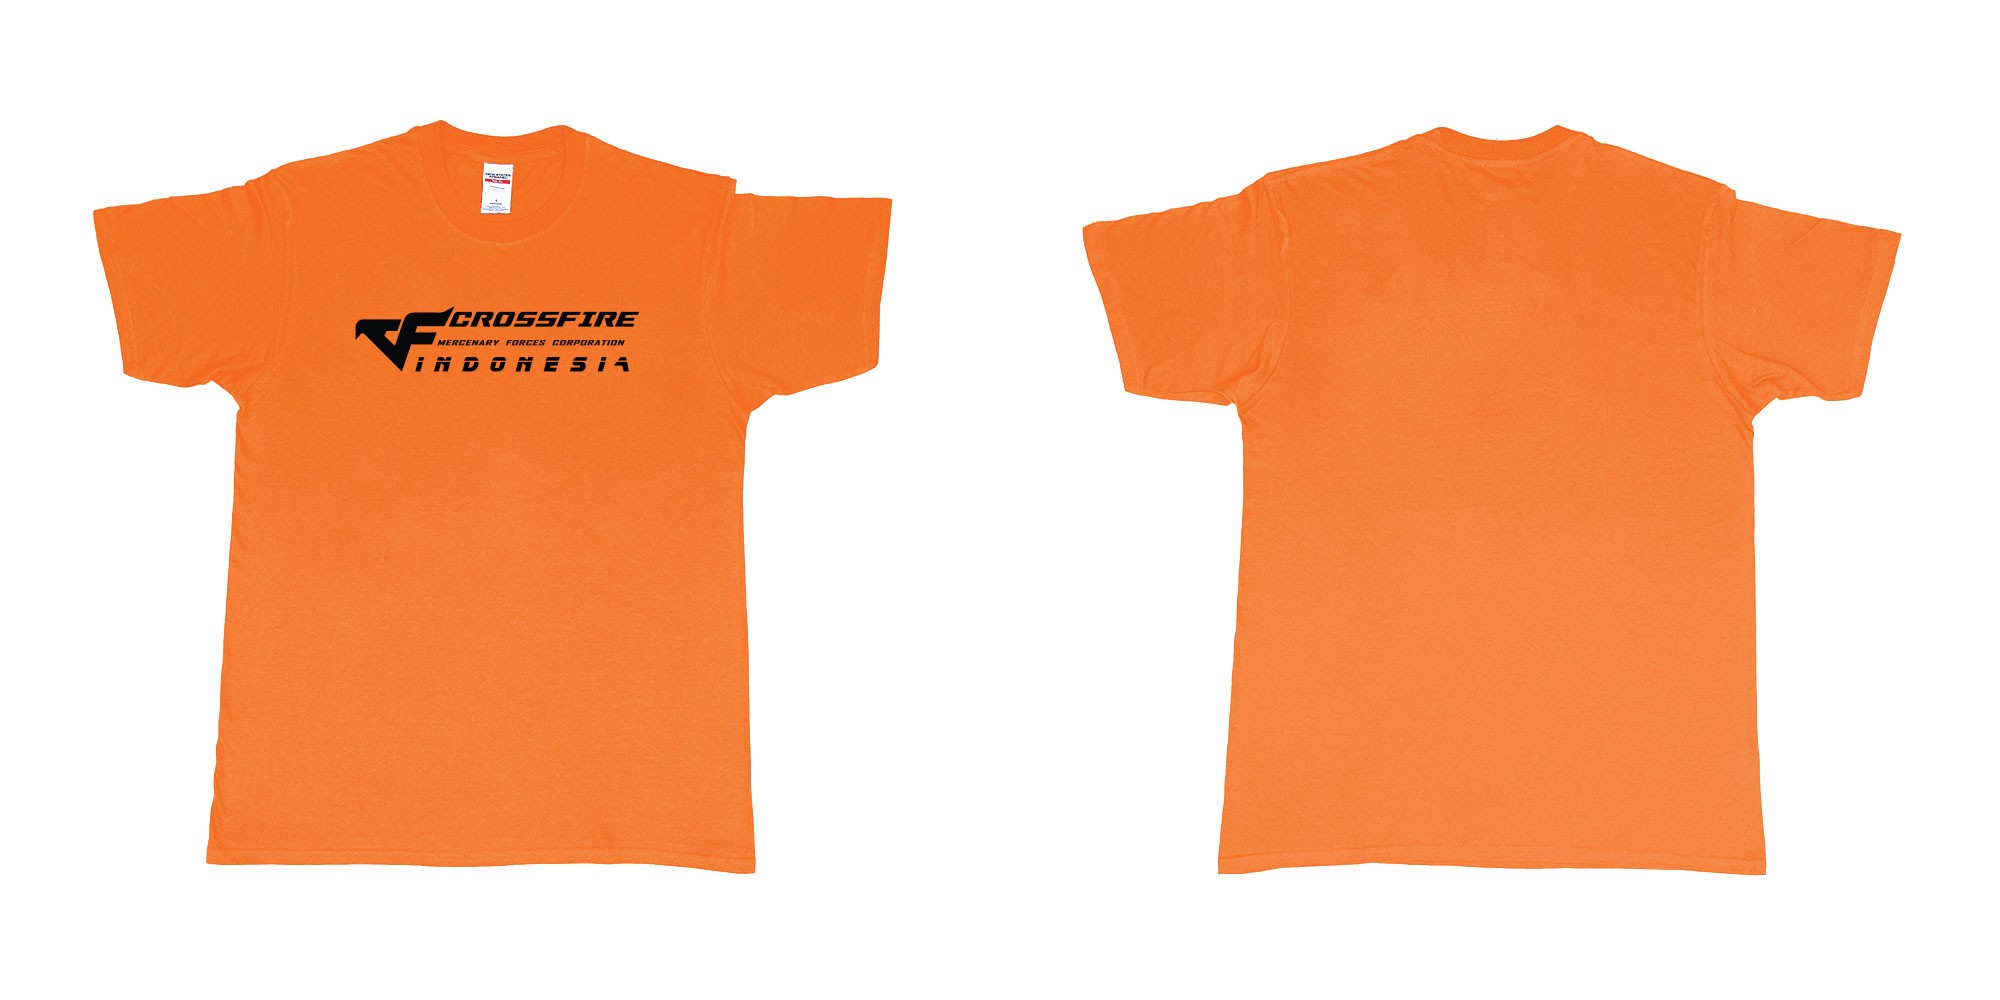 Custom tshirt design cfindo crossfire indonesia tshirt in fabric color orange choice your own text made in Bali by The Pirate Way